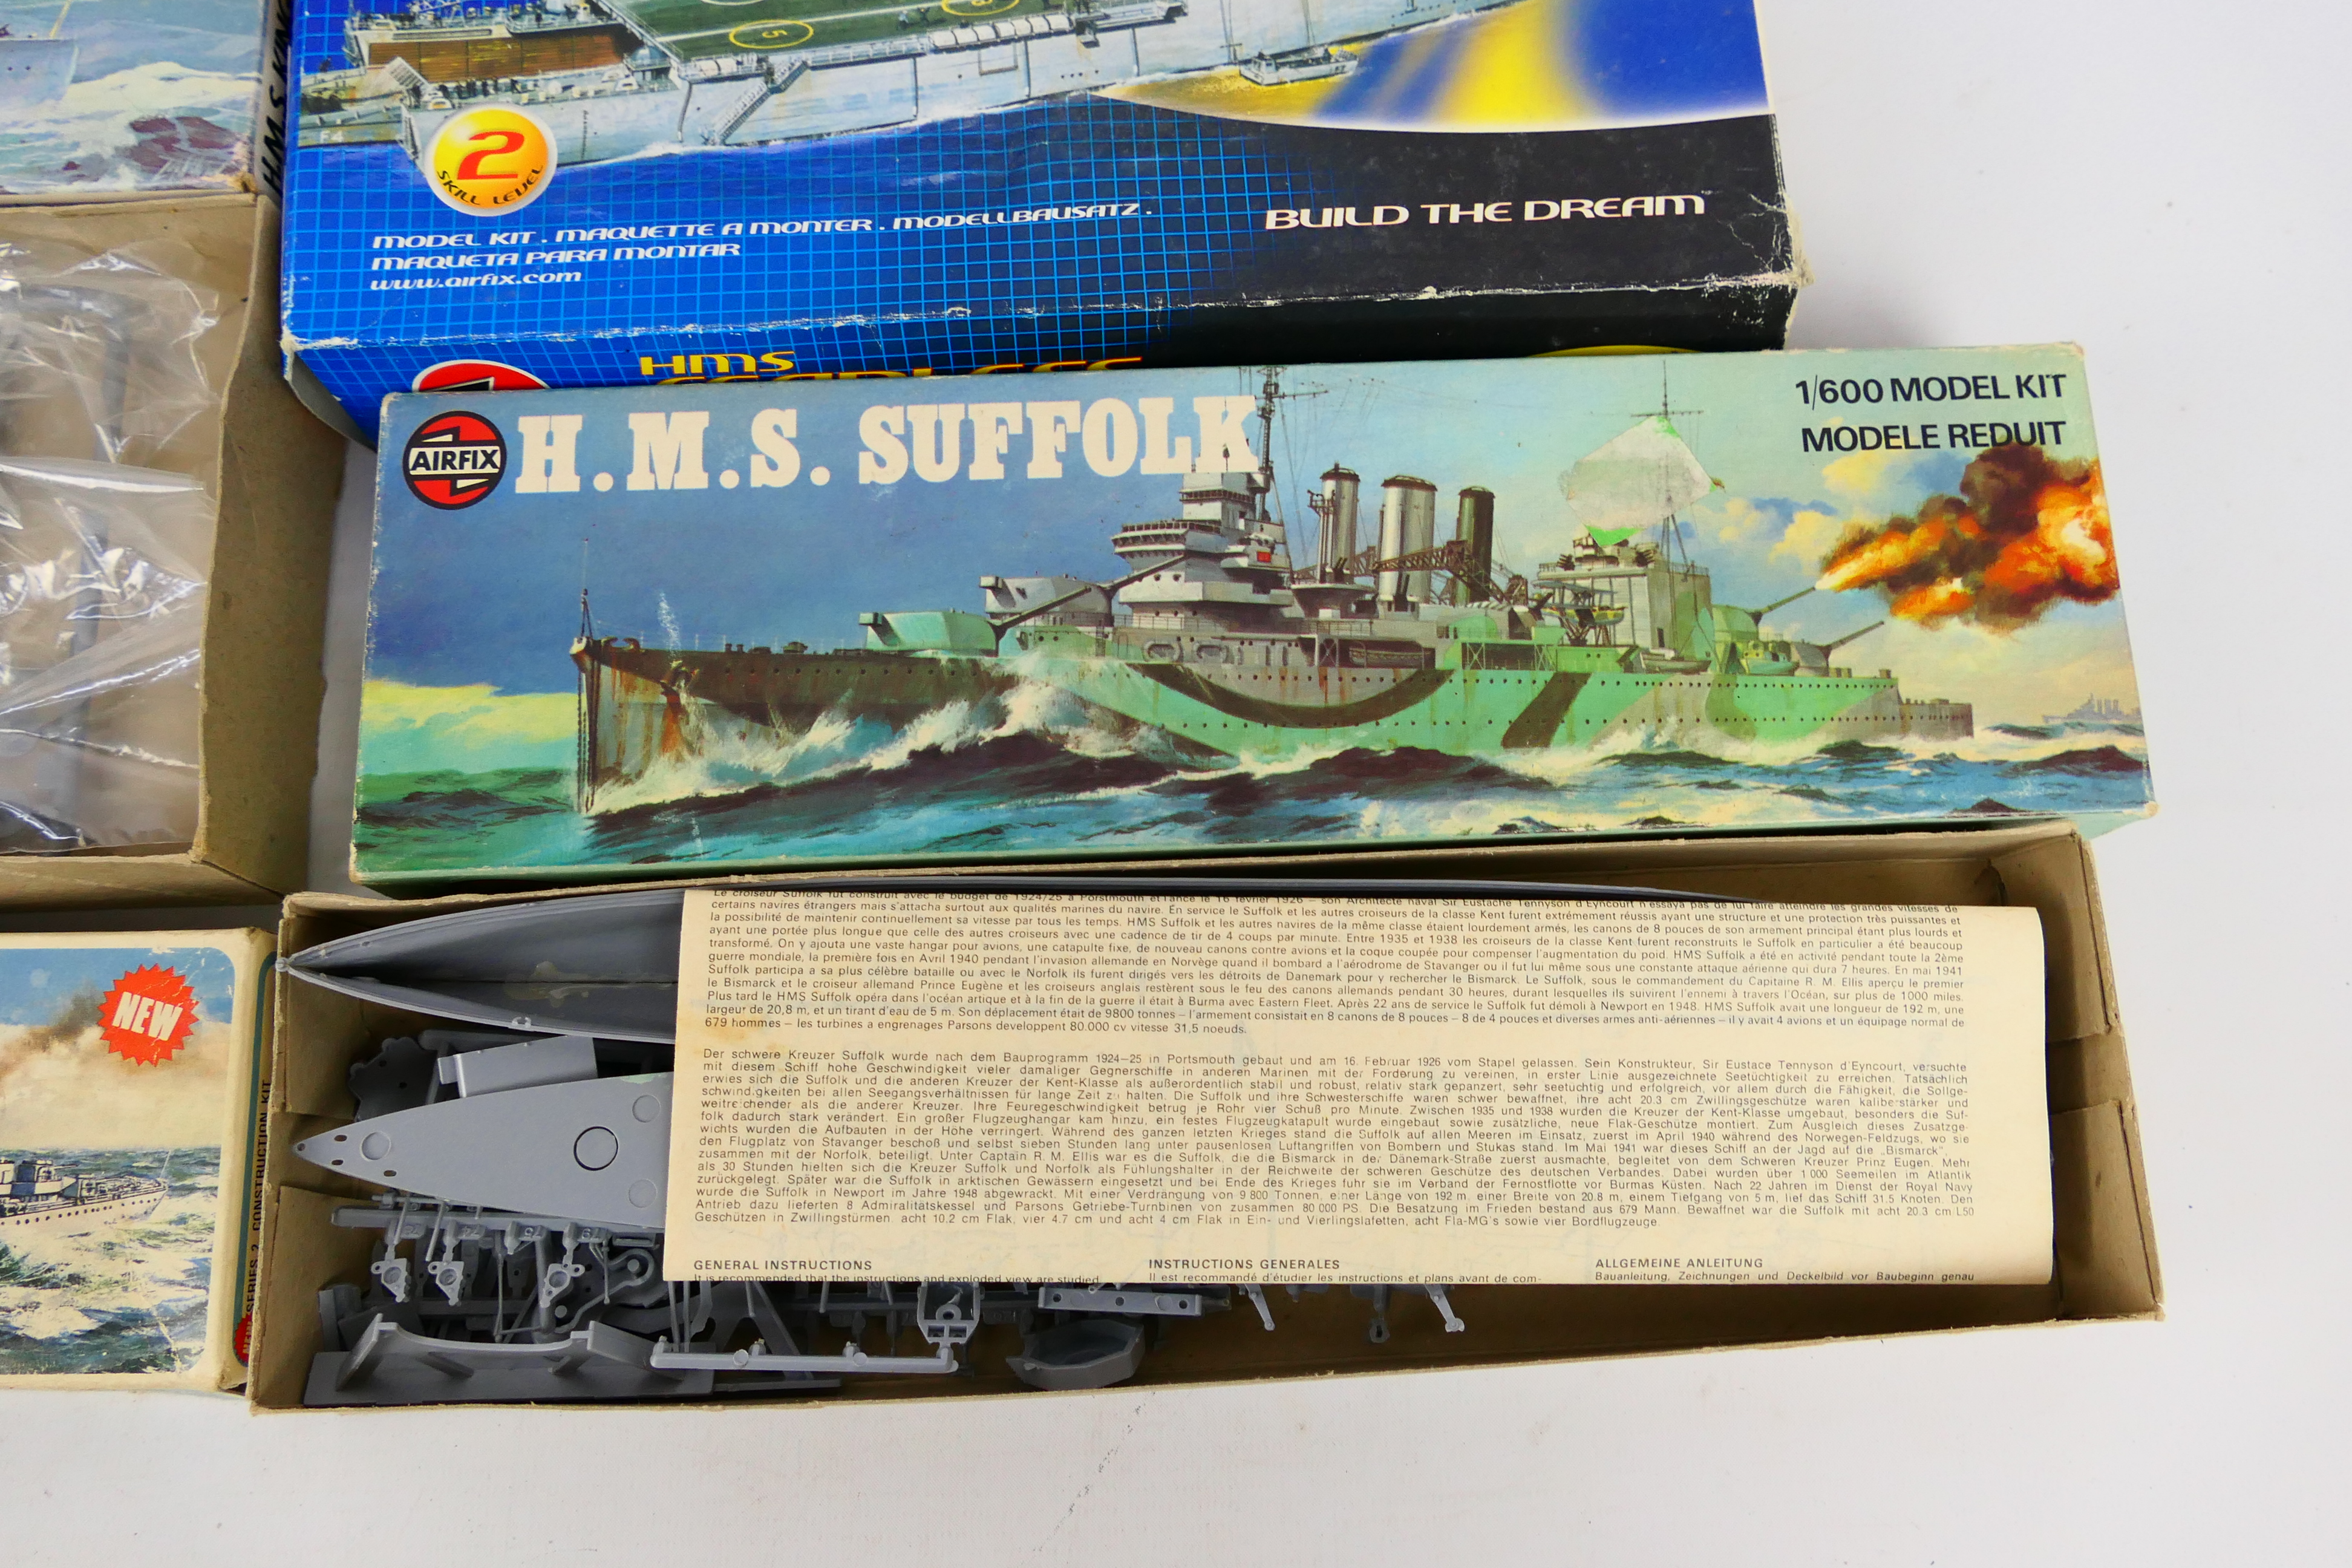 Airfix - Revell - Paget - 5 x boxed model kits, Narvik Class German Destroyer, H.M.S. Suffolk, H.M. - Image 3 of 3